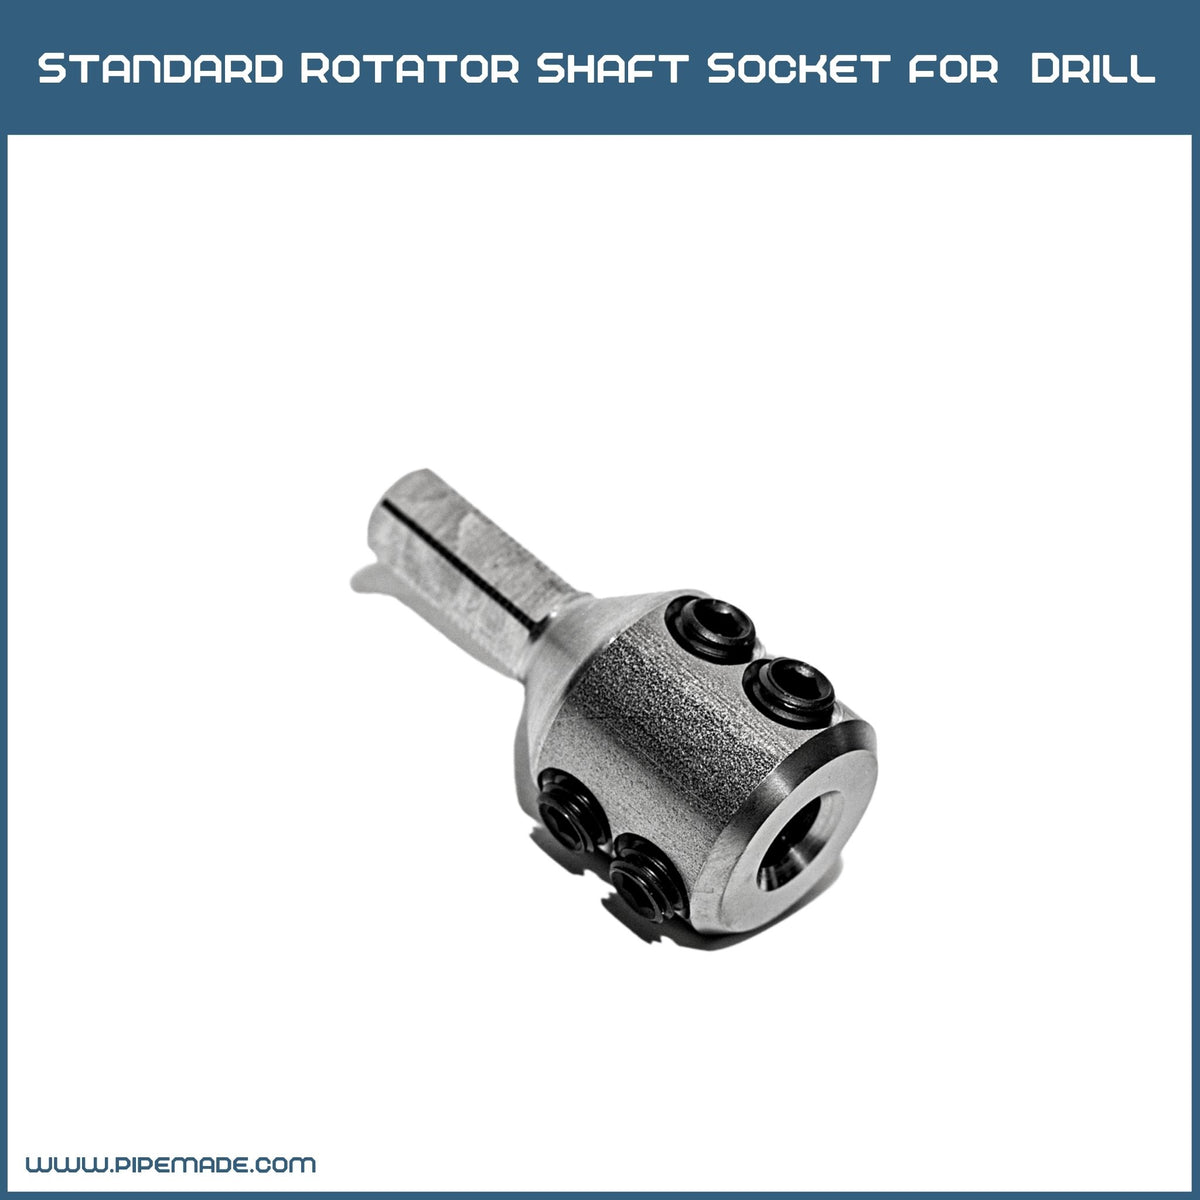 Standard Rotator Shaft Socket For Drill | Accessiories. Connectors. Cables | Zewer | zewer-rotator-shaft-socket-for-power-drill